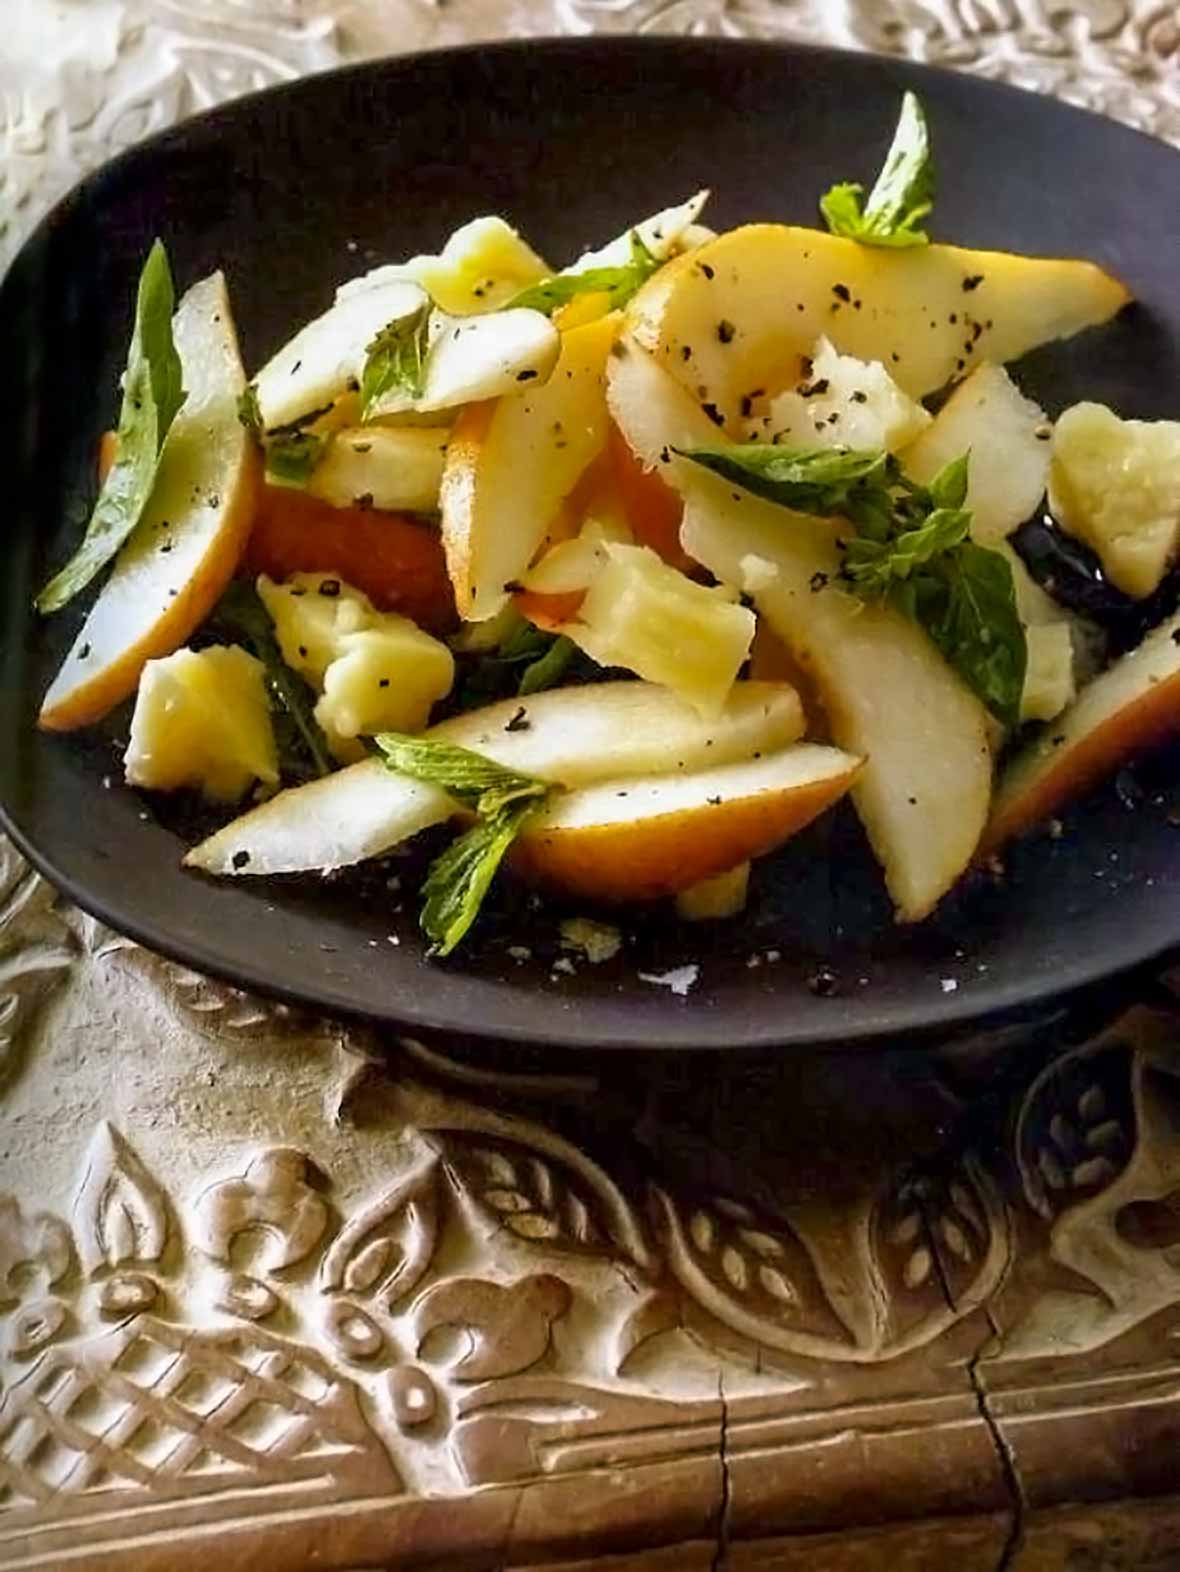 Pear basil pecorino Toscano salad in a large brown serving bowl on a carved wooden tray